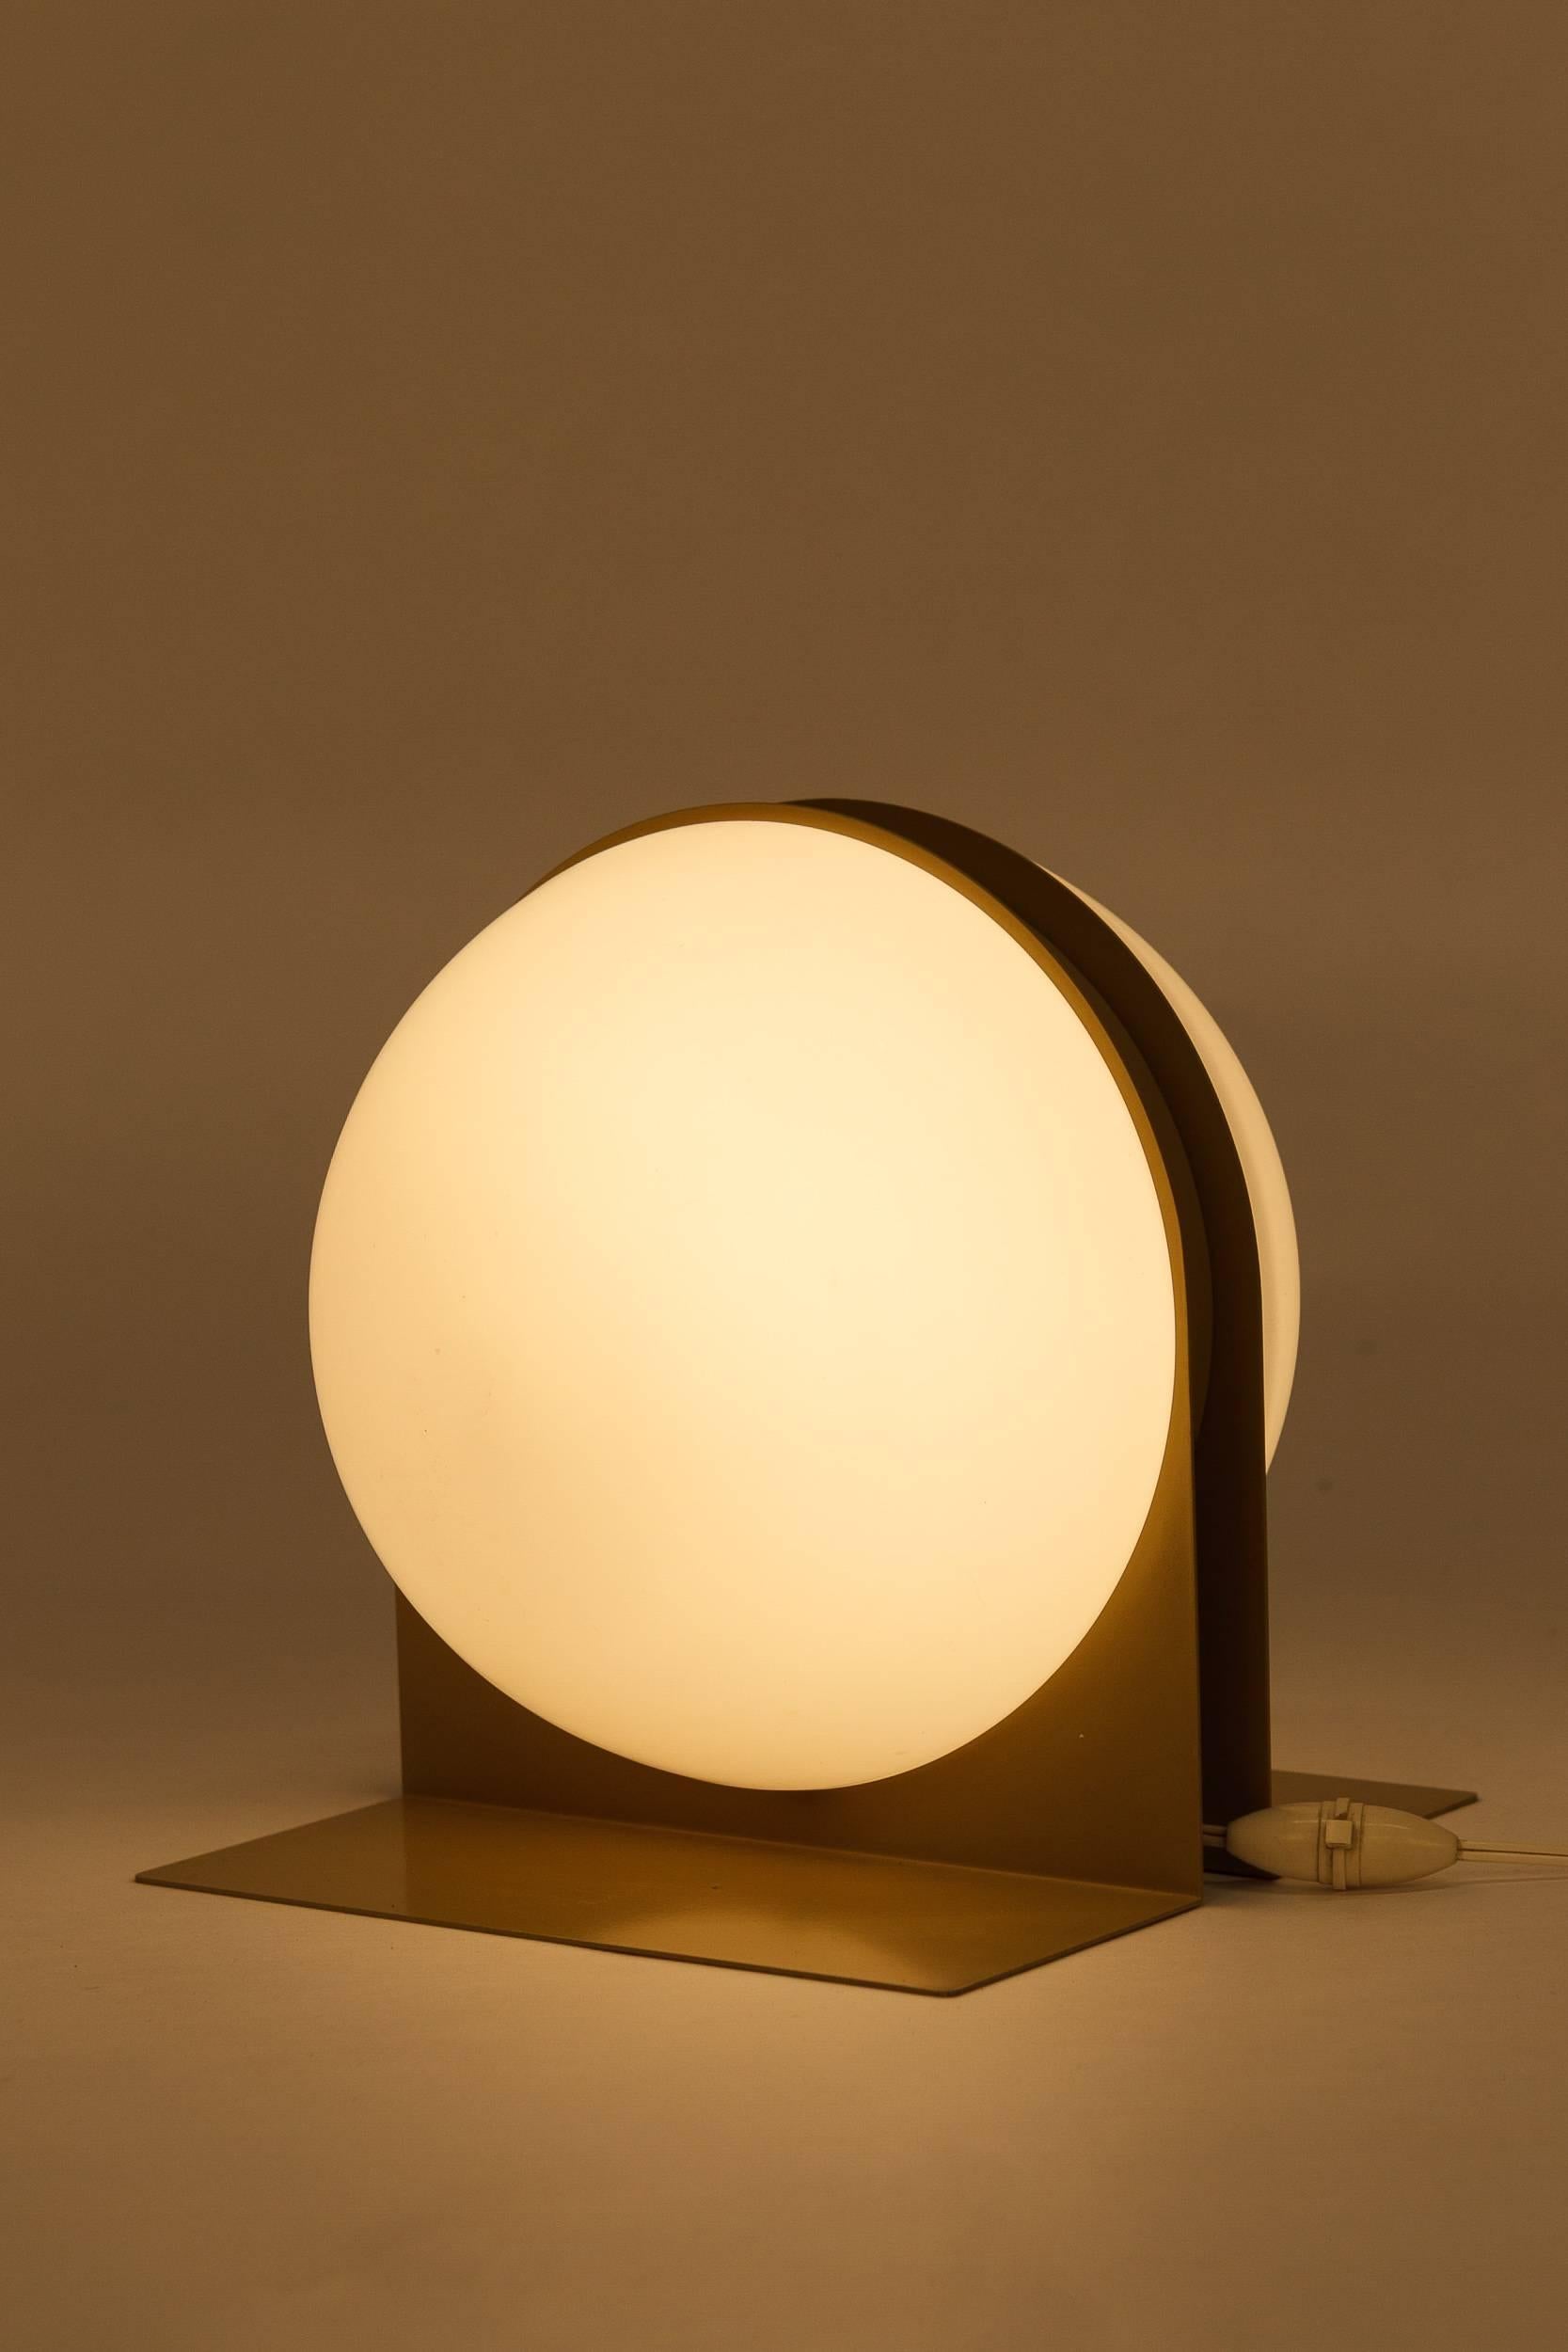 Lacquered Ben Swildens Table Lamp for Verre 10445 Lumiere, 1970 For Sale